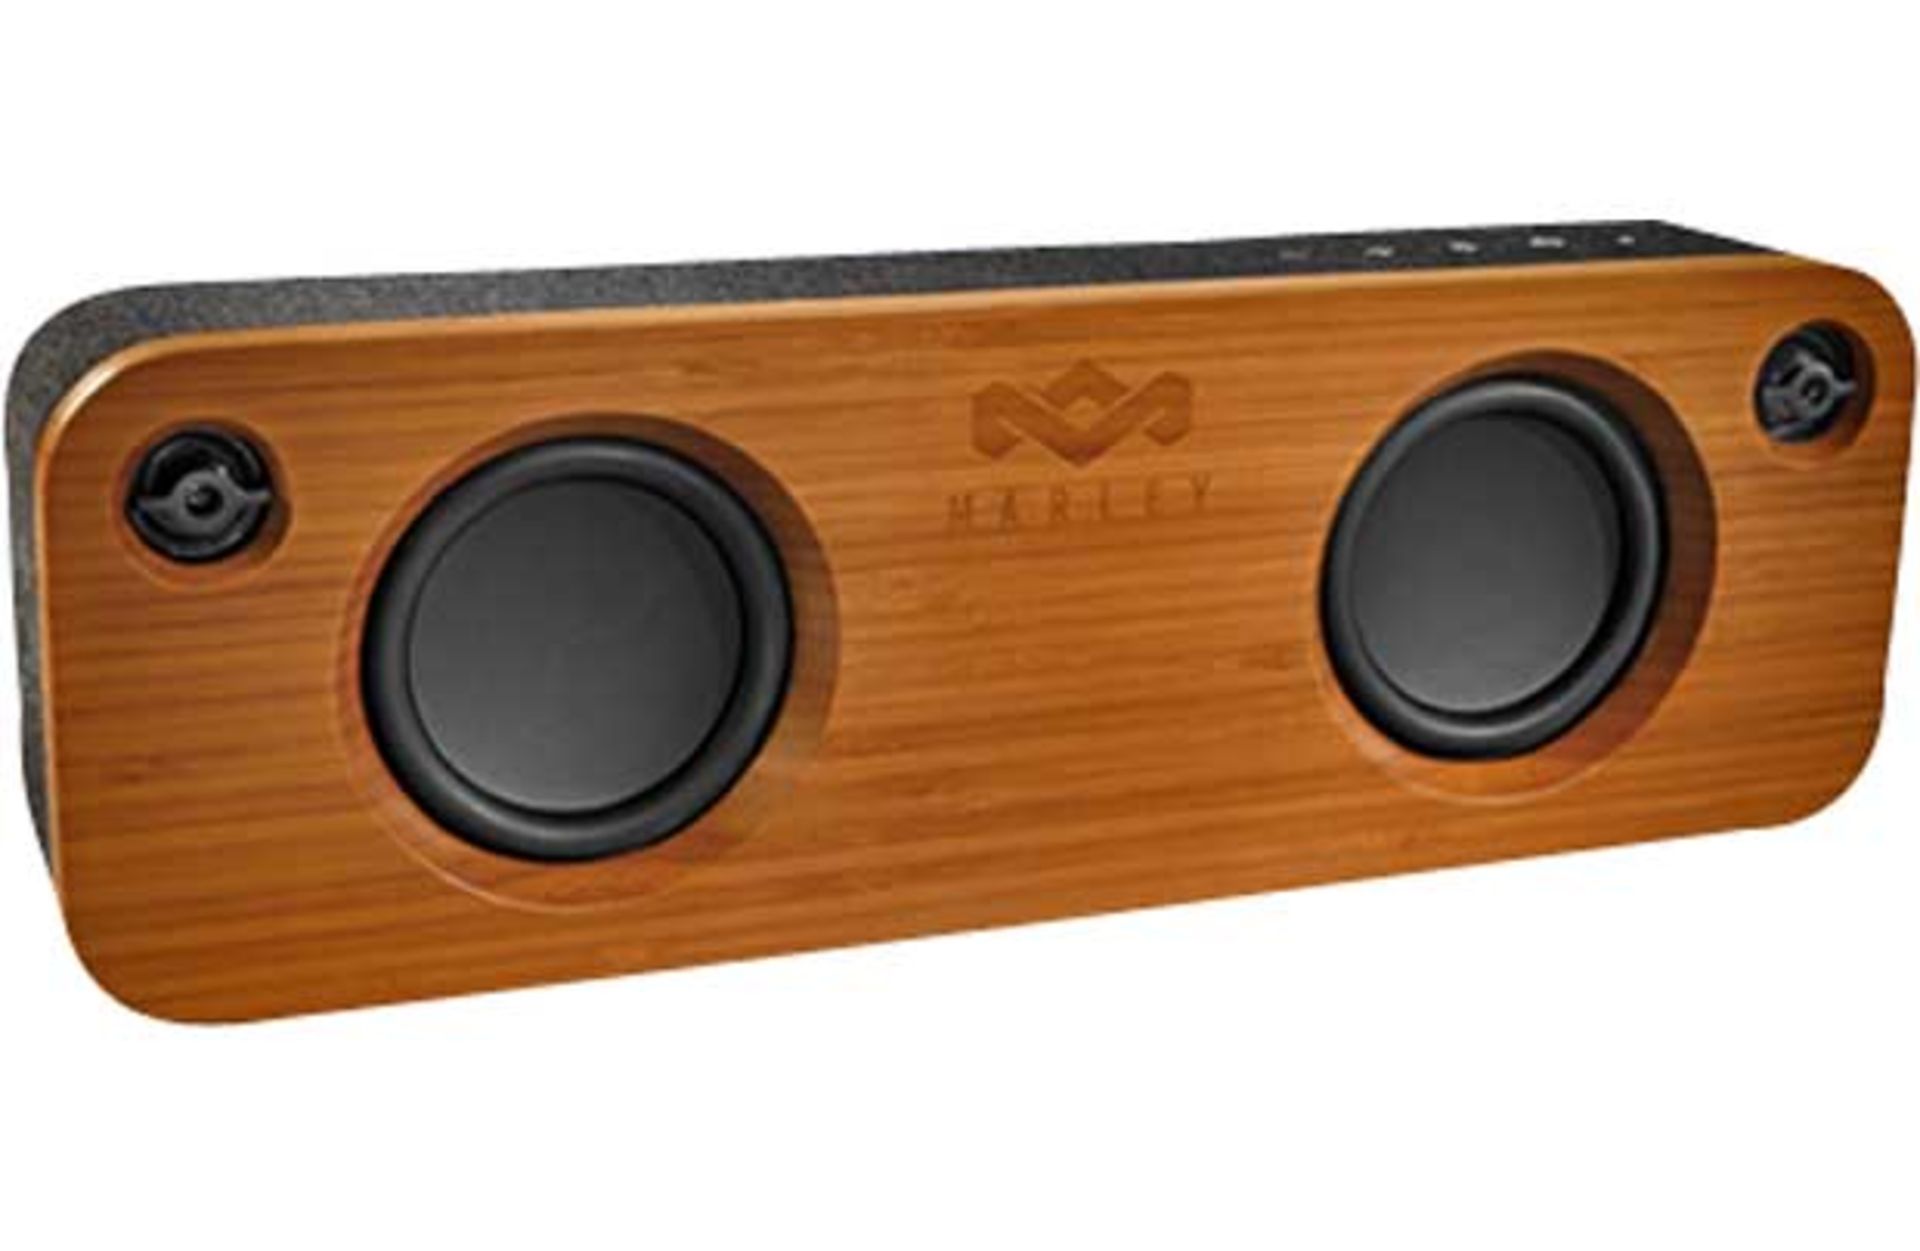 V Grade A Marley Get It Together Portable Audio System With Bluetooth With 8 Hour BatteryWith